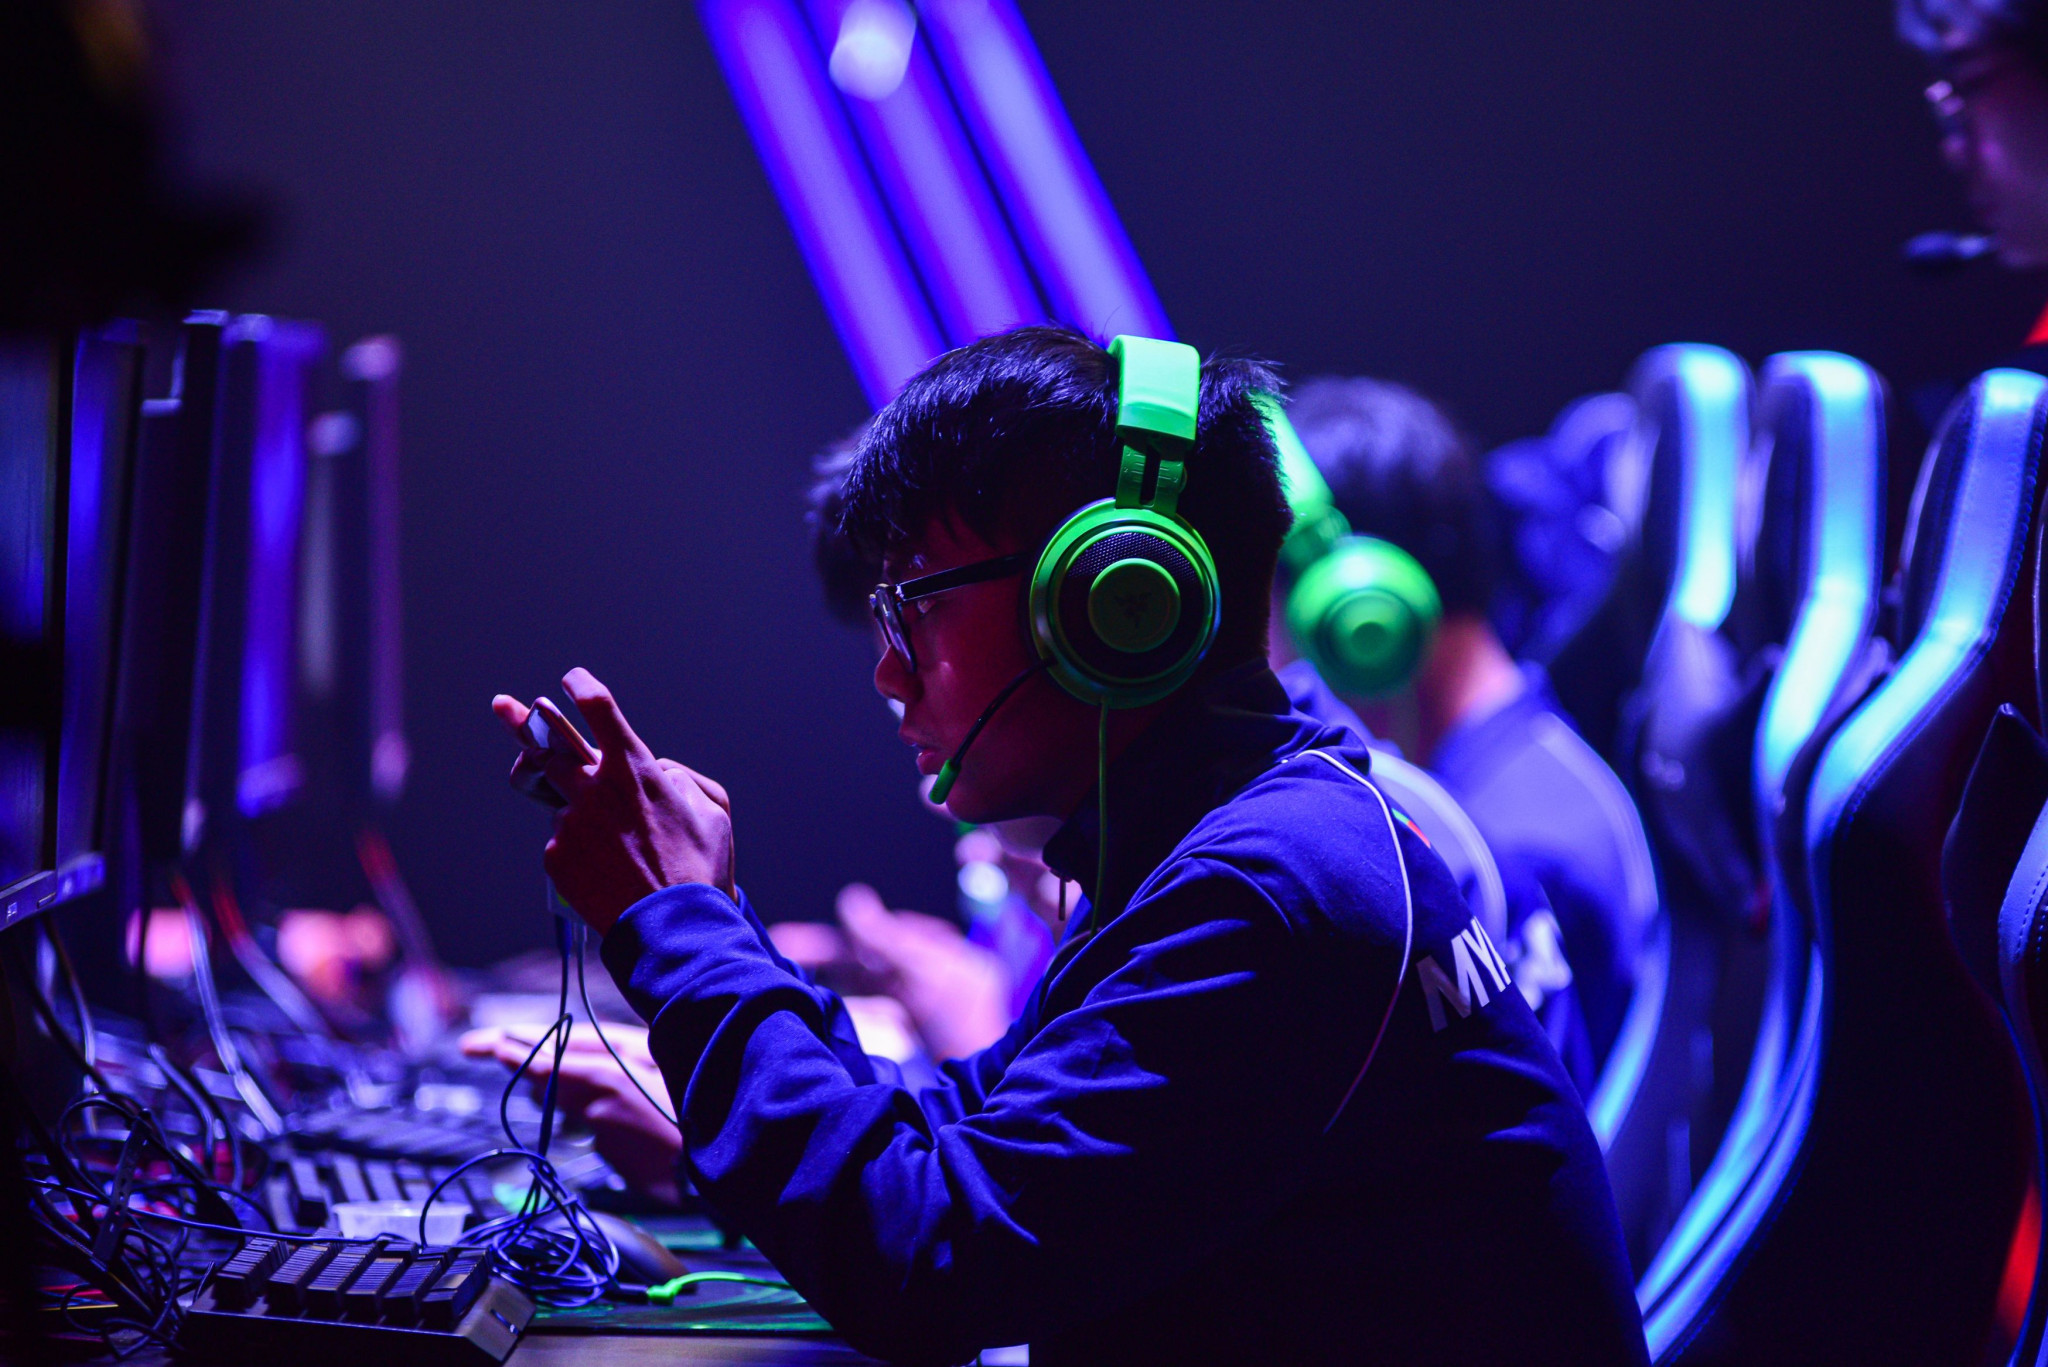 Esports has been recognised as a professional sport in Thailand ©Getty Images